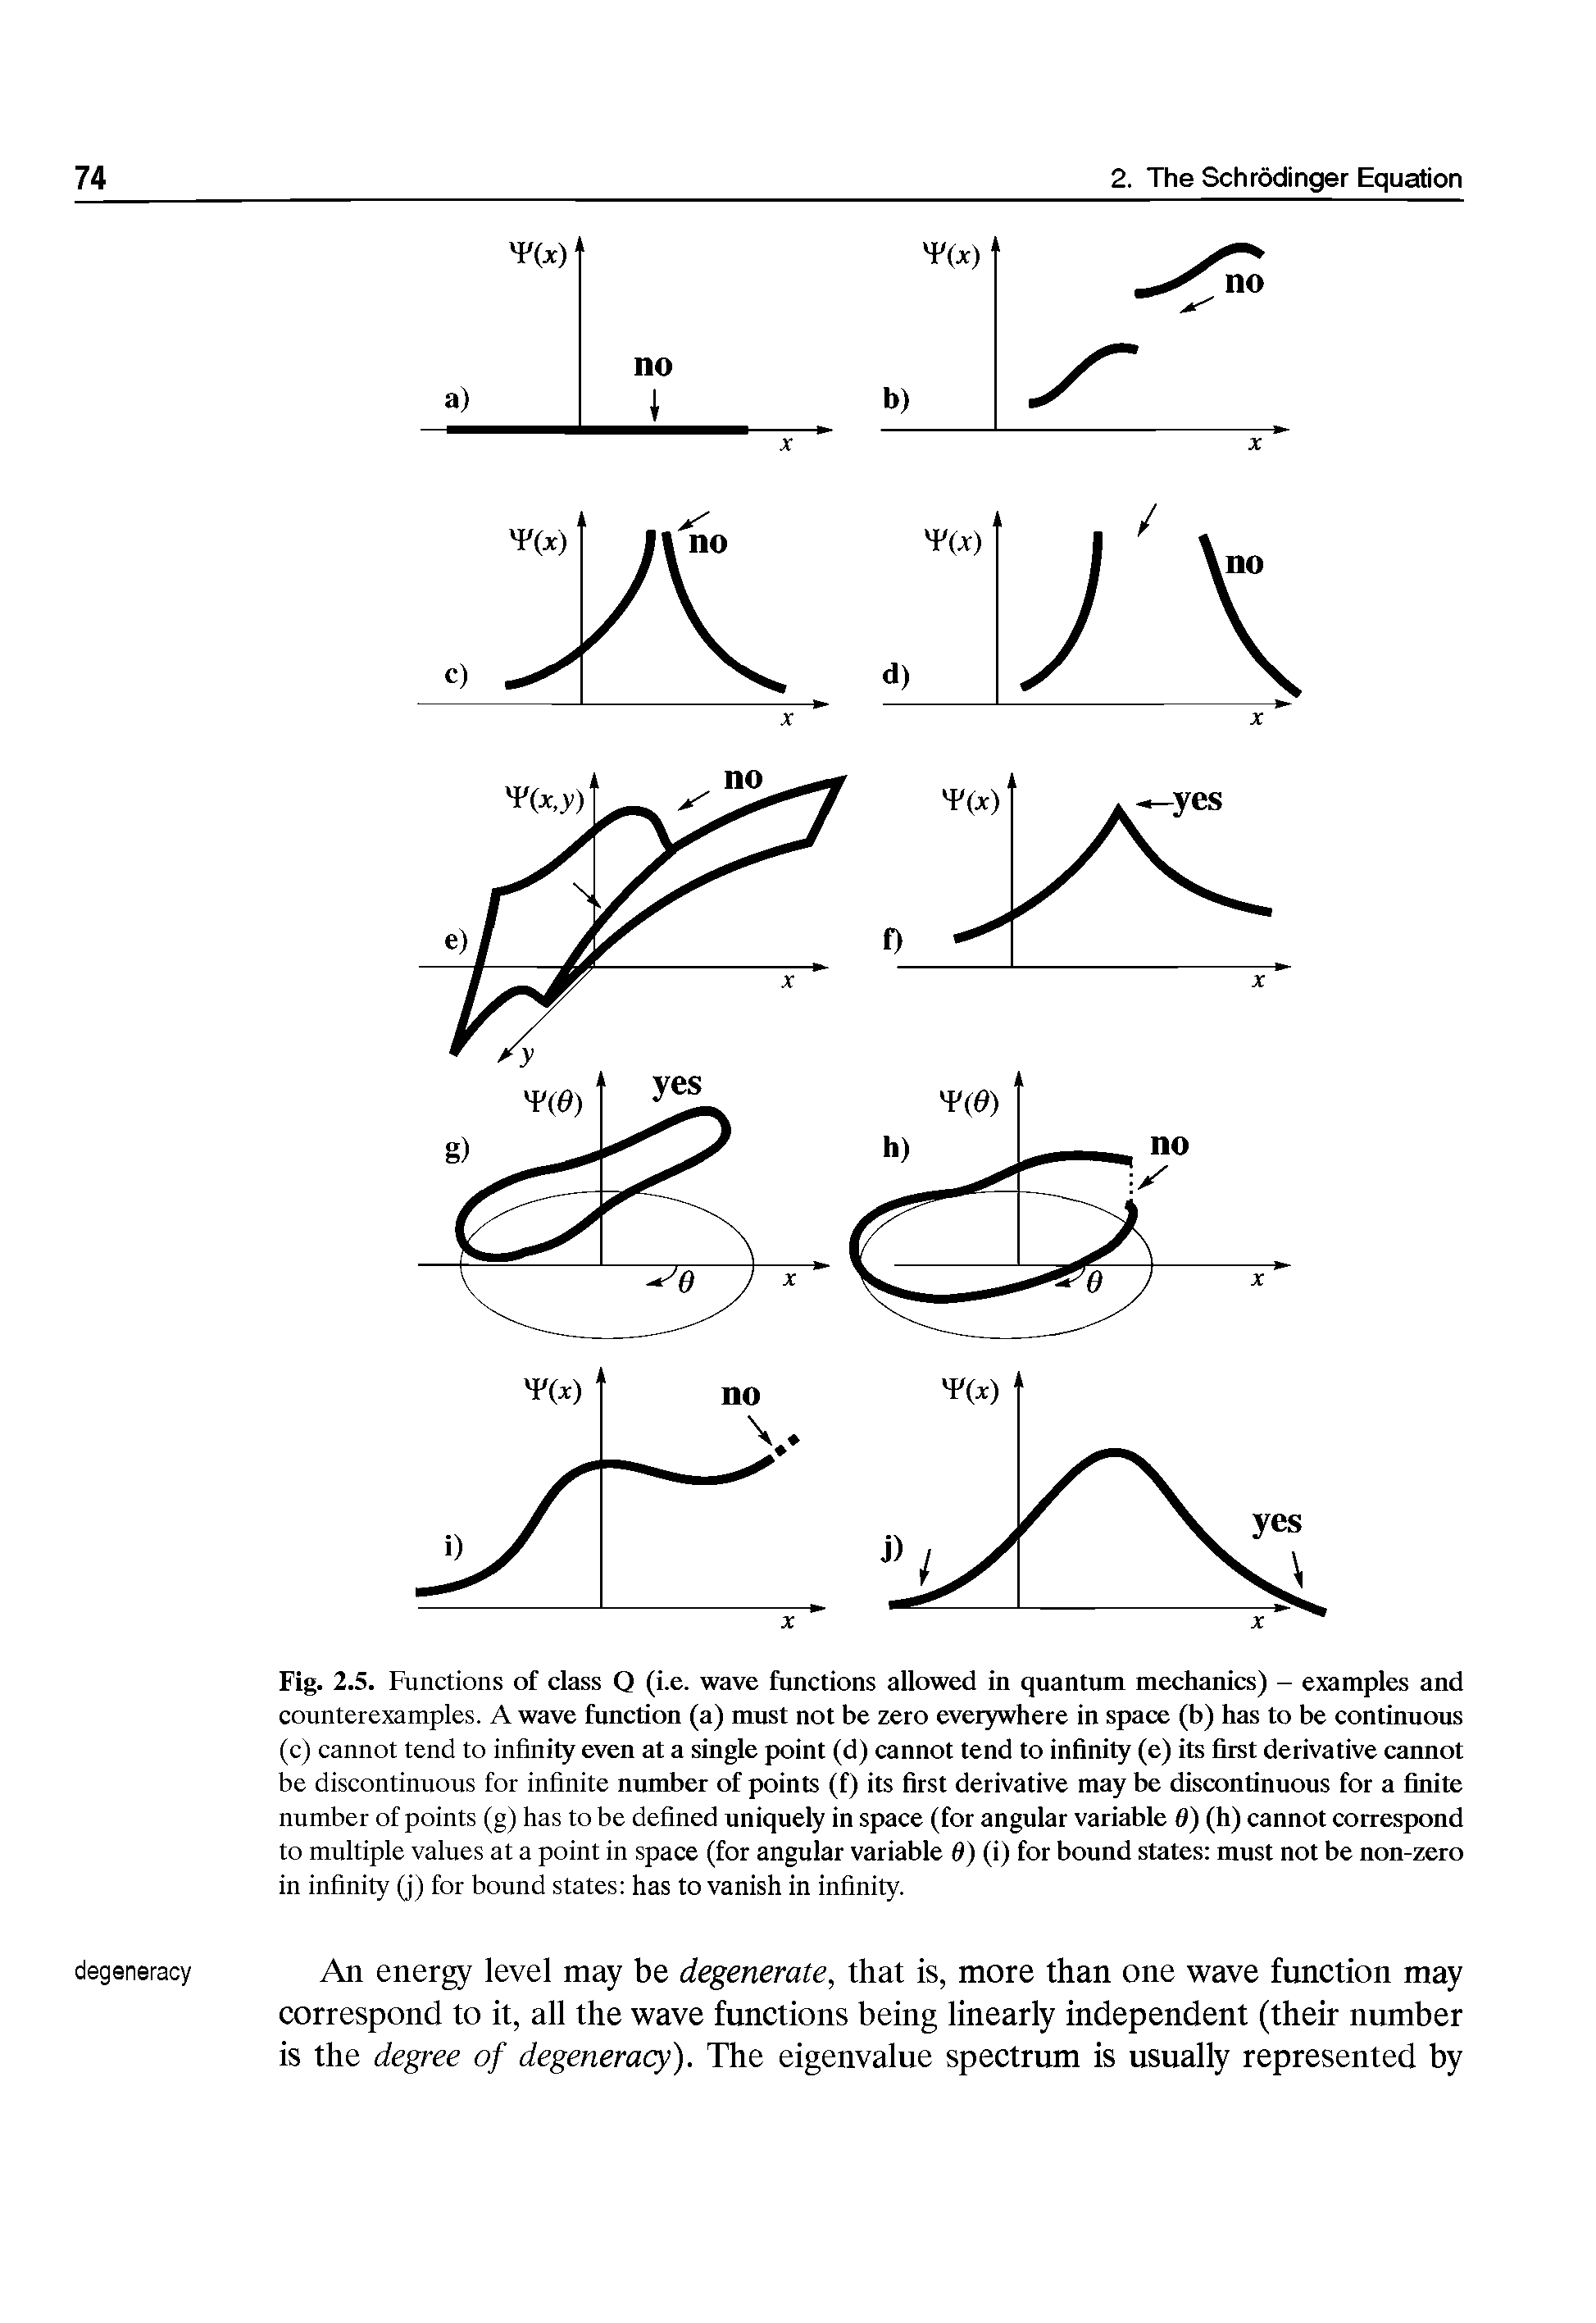 Fig. 2.5. Functions of class Q (i.e. wave functions allowed in quantum mechanics) - examples and counterexamples. A wave function (a) must not be zero everywhere in space (b) has to be continuous (c) cannot tend to infinity even at a single point (d) cannot tend to infinity (e) its first derivative cannot be discontinuous for infinite number of points (f) its first derivative may be discontinuous for a finite number of points (g) has to be defined uniquely in space (for angular variable 0) (h) cannot correspond to multiple values at a point in space (for angular variable 6) (i) for bound states must not be non-zero in infinity (j) for bound states has to vanish in infinity.